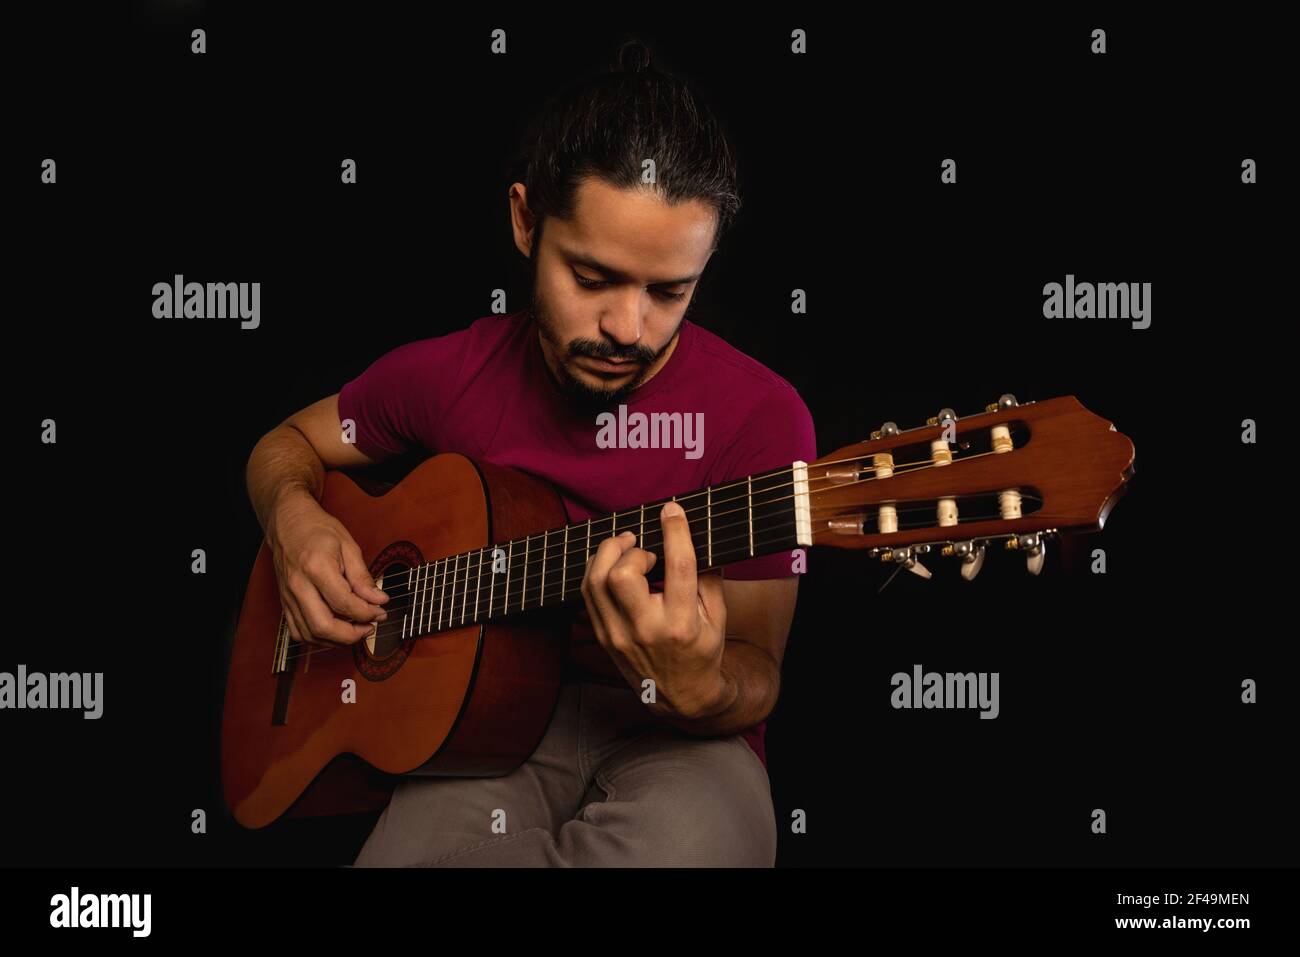 Man playing an acoustic guitar with black background Stock Photo